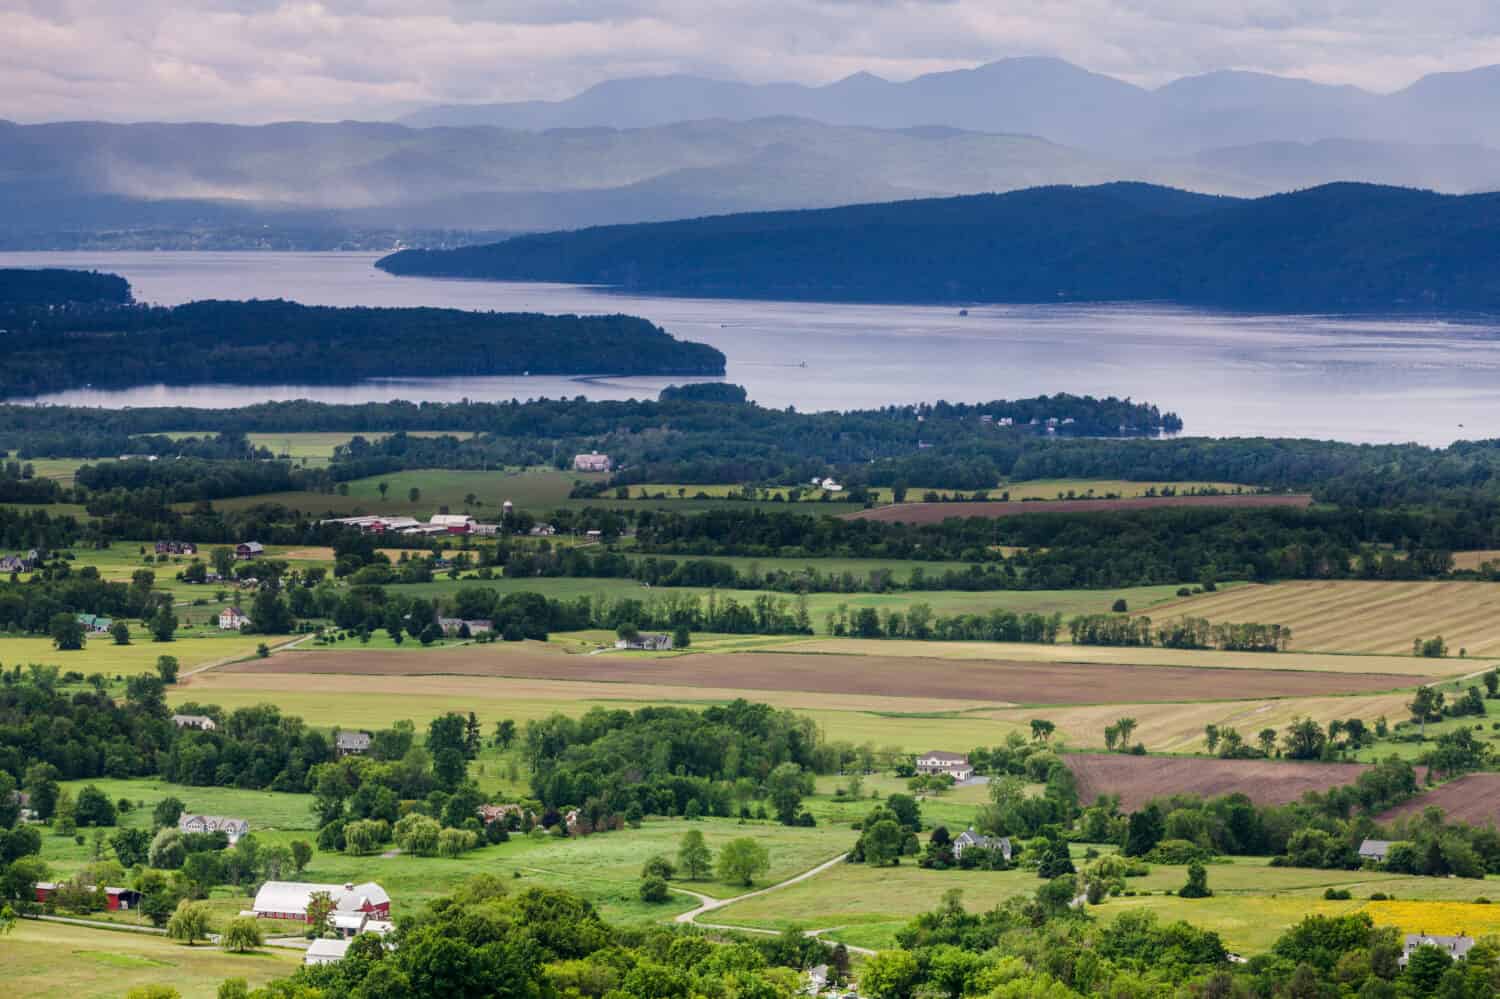 Horizontal Vermont Countryside scene looking towards Lake Champlain and the Adirondack Mountains. The shot was taken from Mount Philo State Park